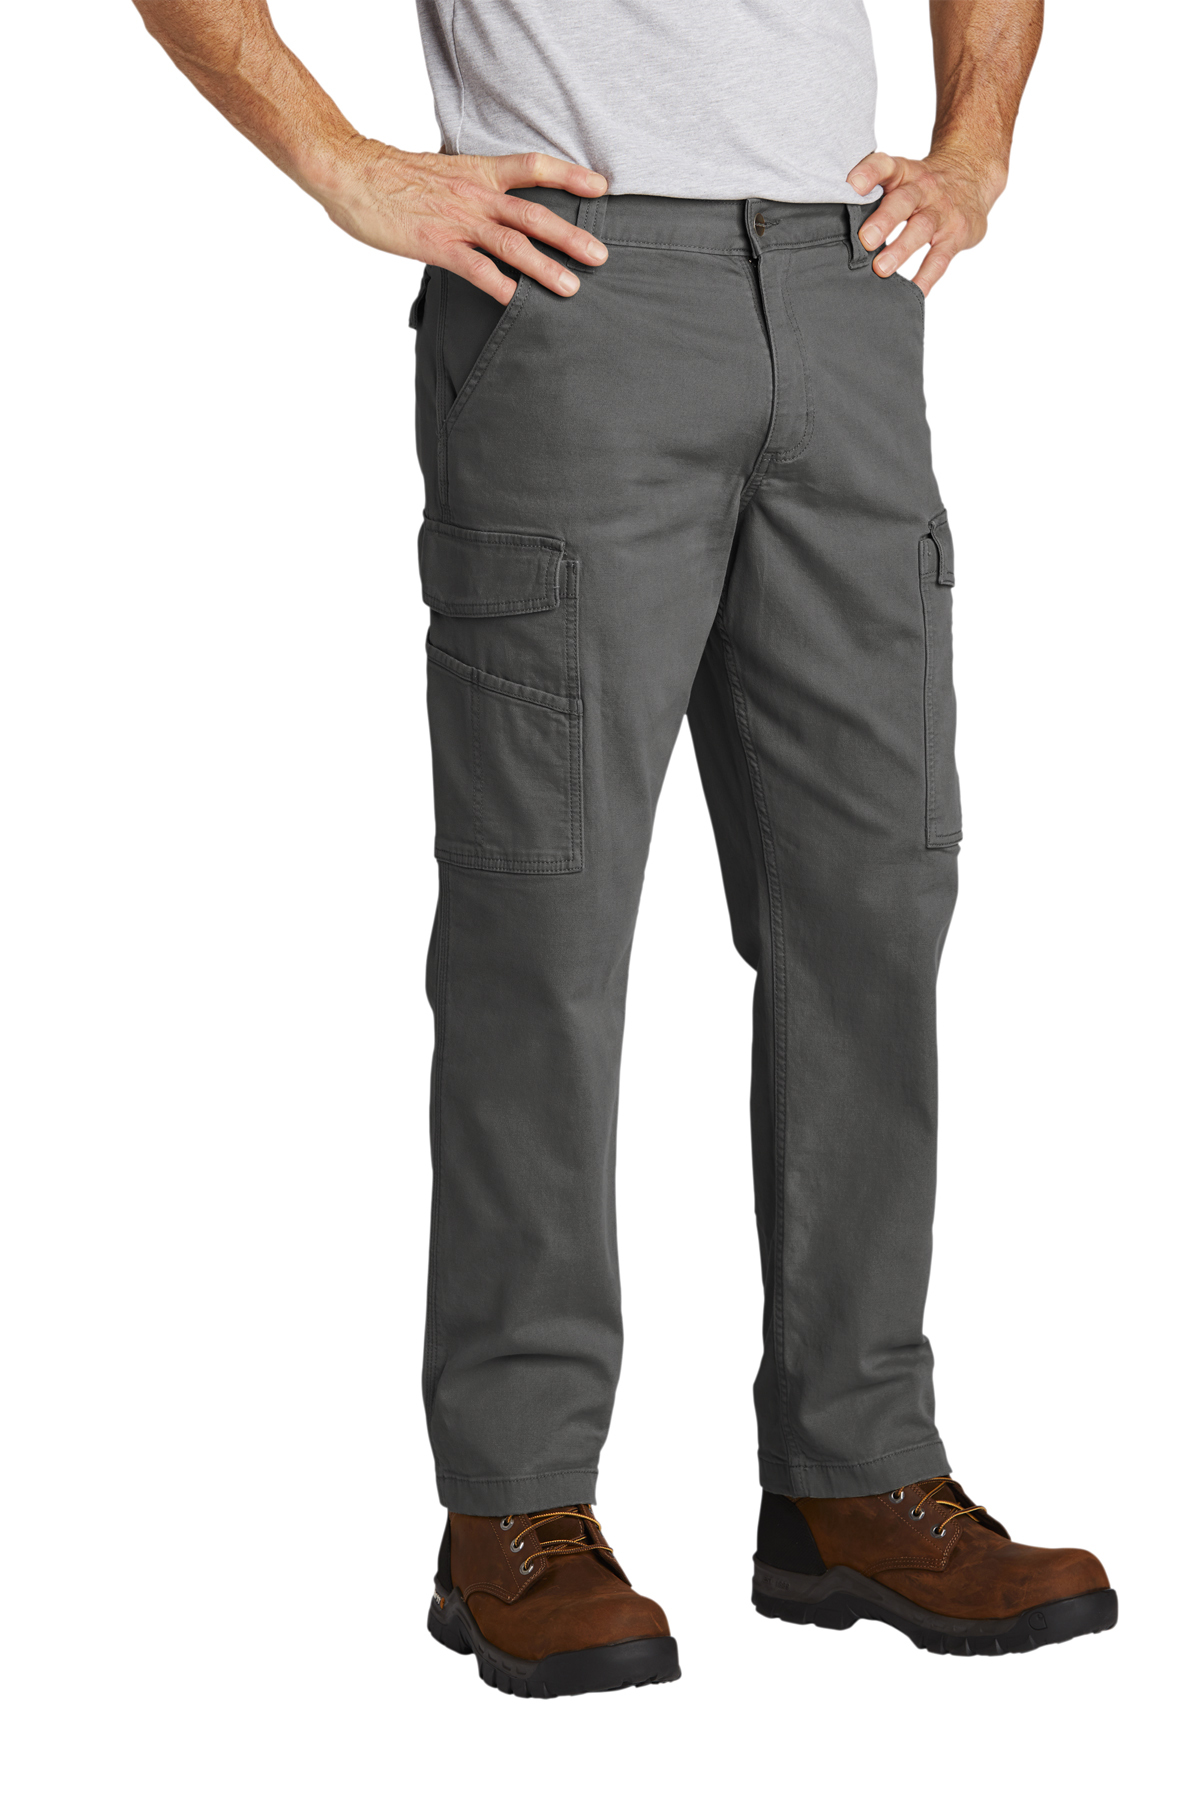 Carhartt Rugged Flex Rigby Cargo Pant | Product | Company Casuals